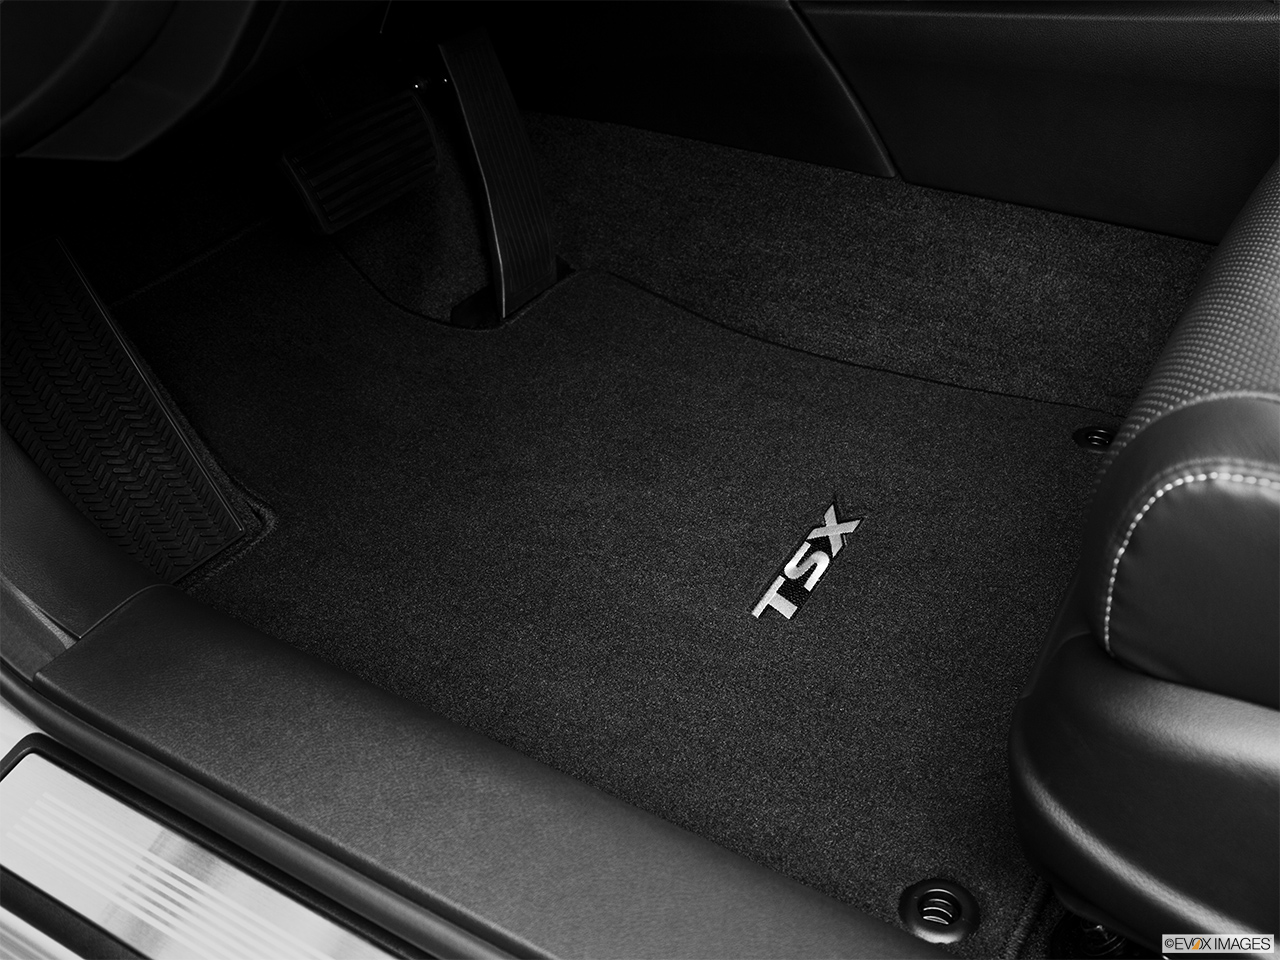 2013 Acura TSX 5-speed Automatic Driver's floor mat and pedals. Mid-seat level from outside looking in. 